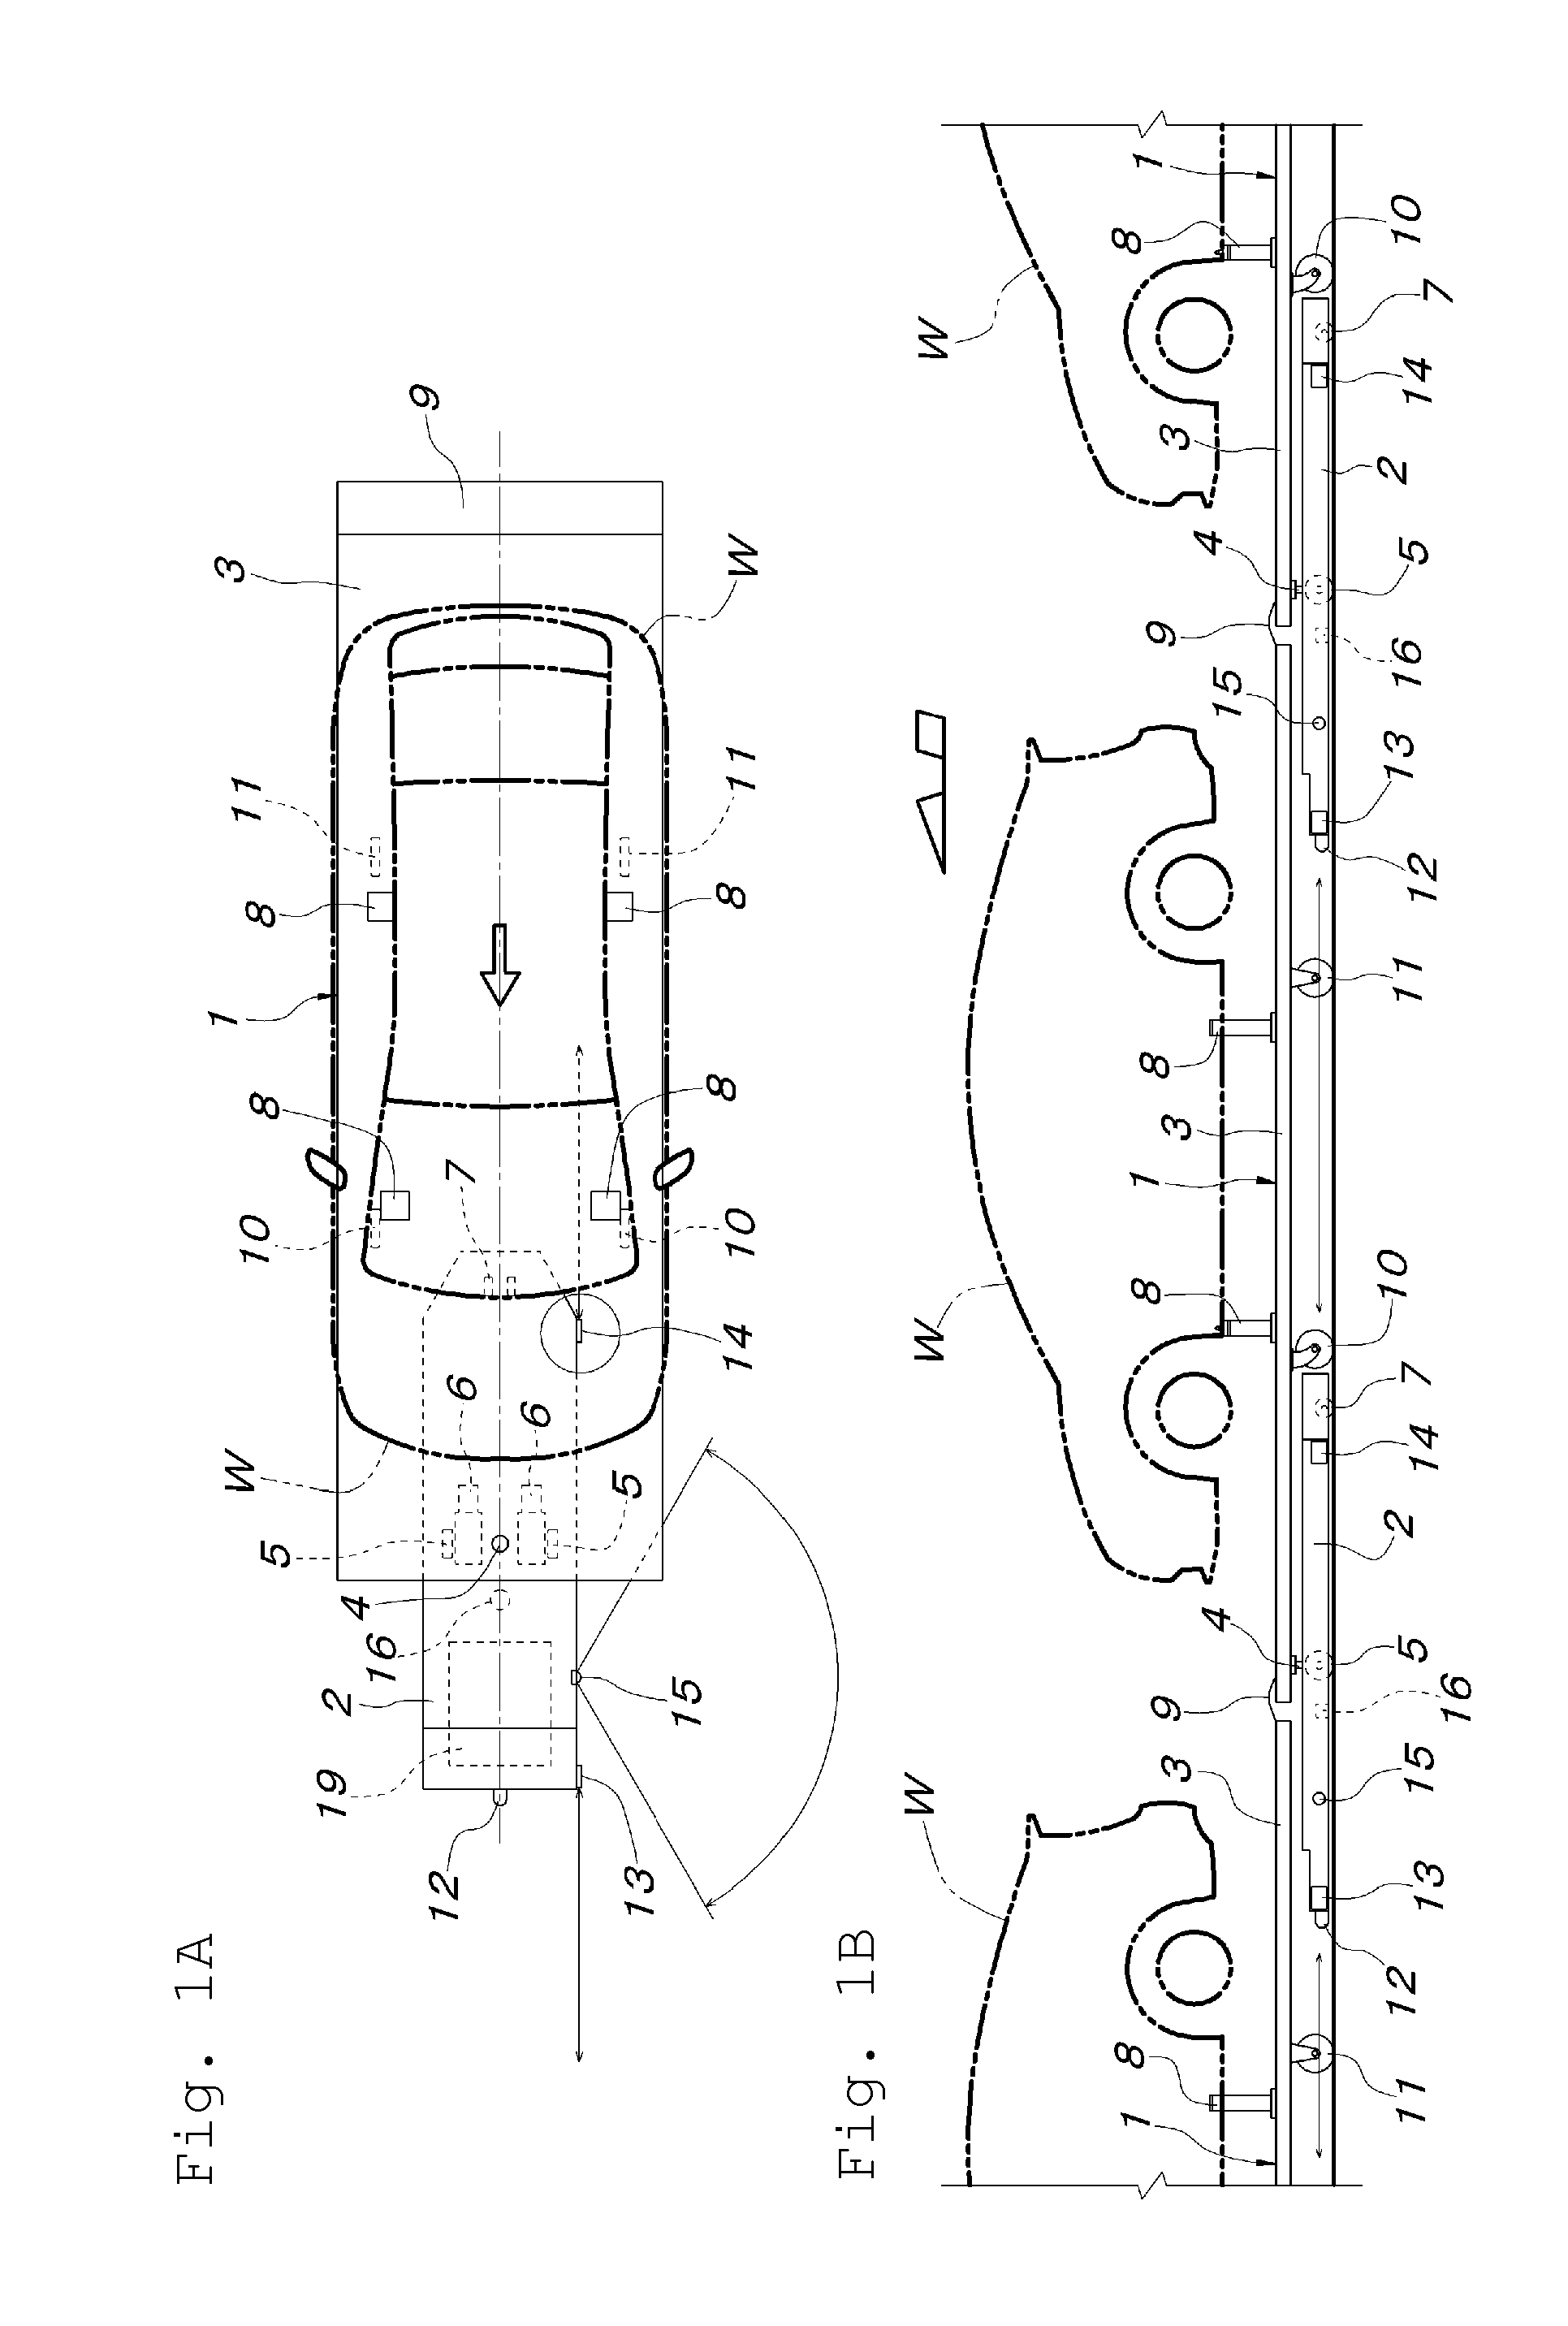 Method For Controlling Movement Of Travelling Carriers